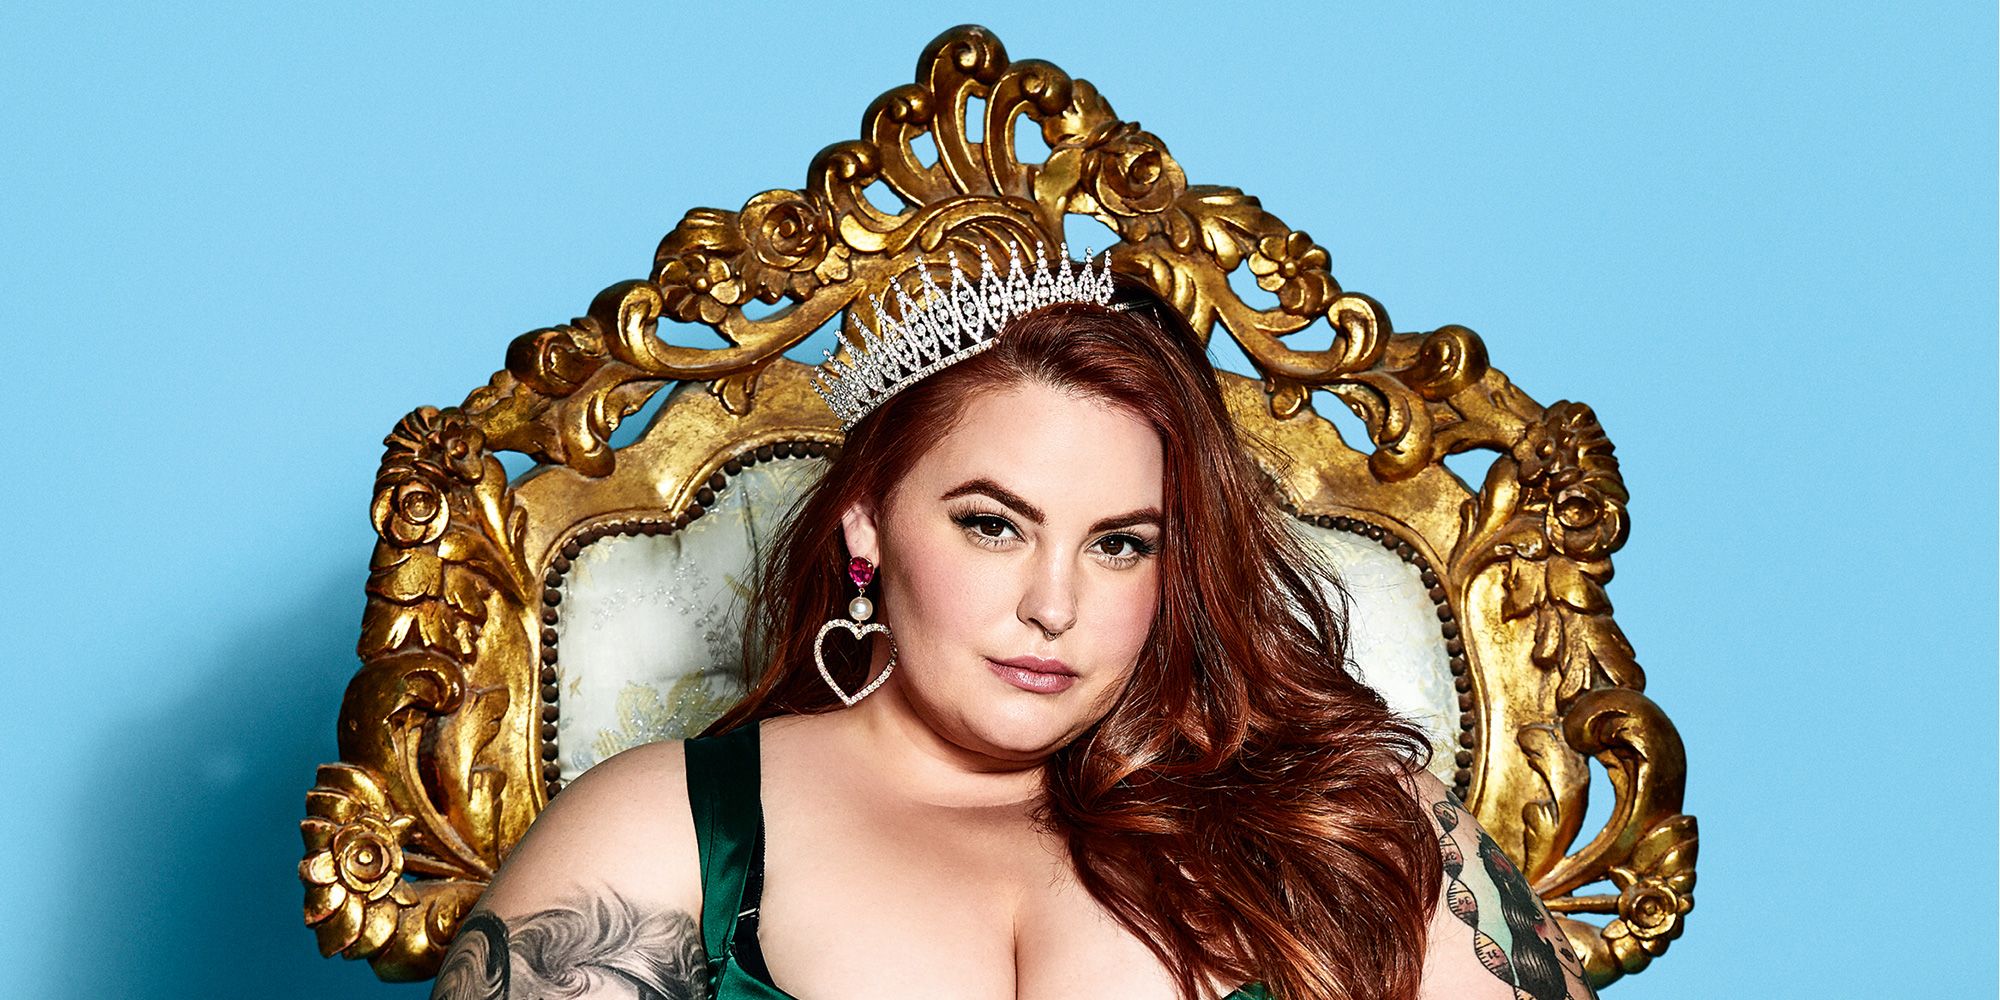 H&M Is Expanding Its Plus-Size Offering With Help From Tess Holliday